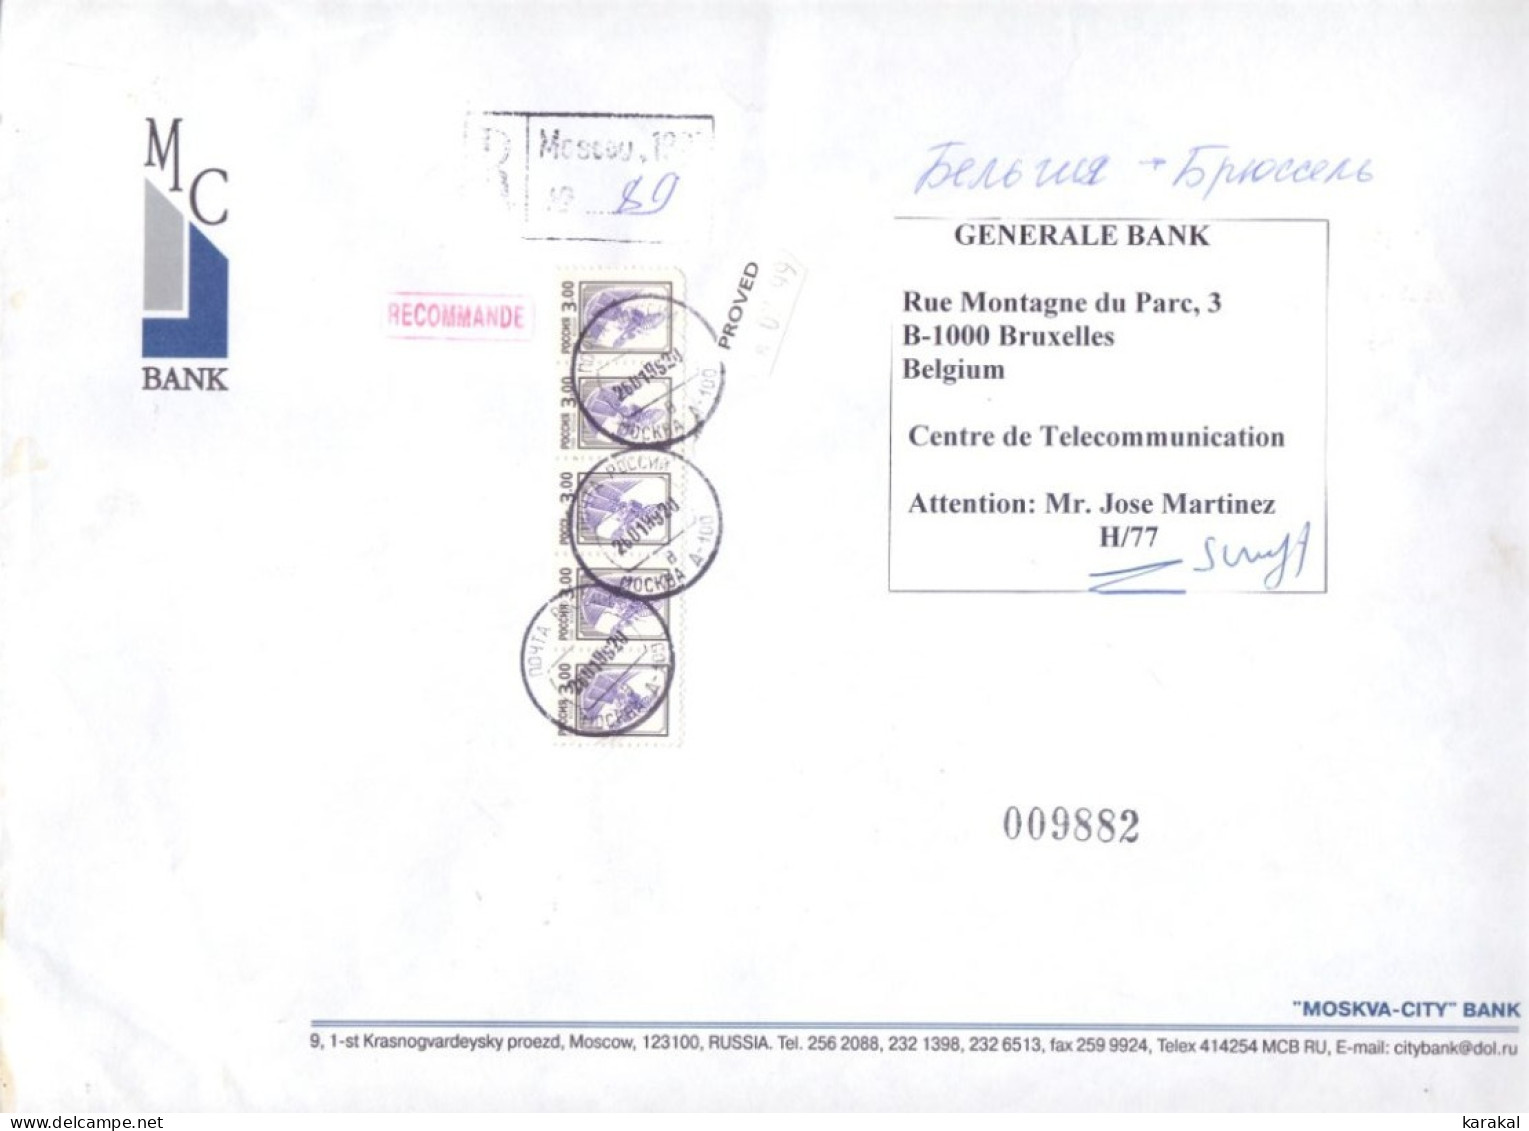 Bank Mail Russia Russie Large Envelope Registered Recommandée From Moscow To Bruxelles Belgium 1999 - Covers & Documents